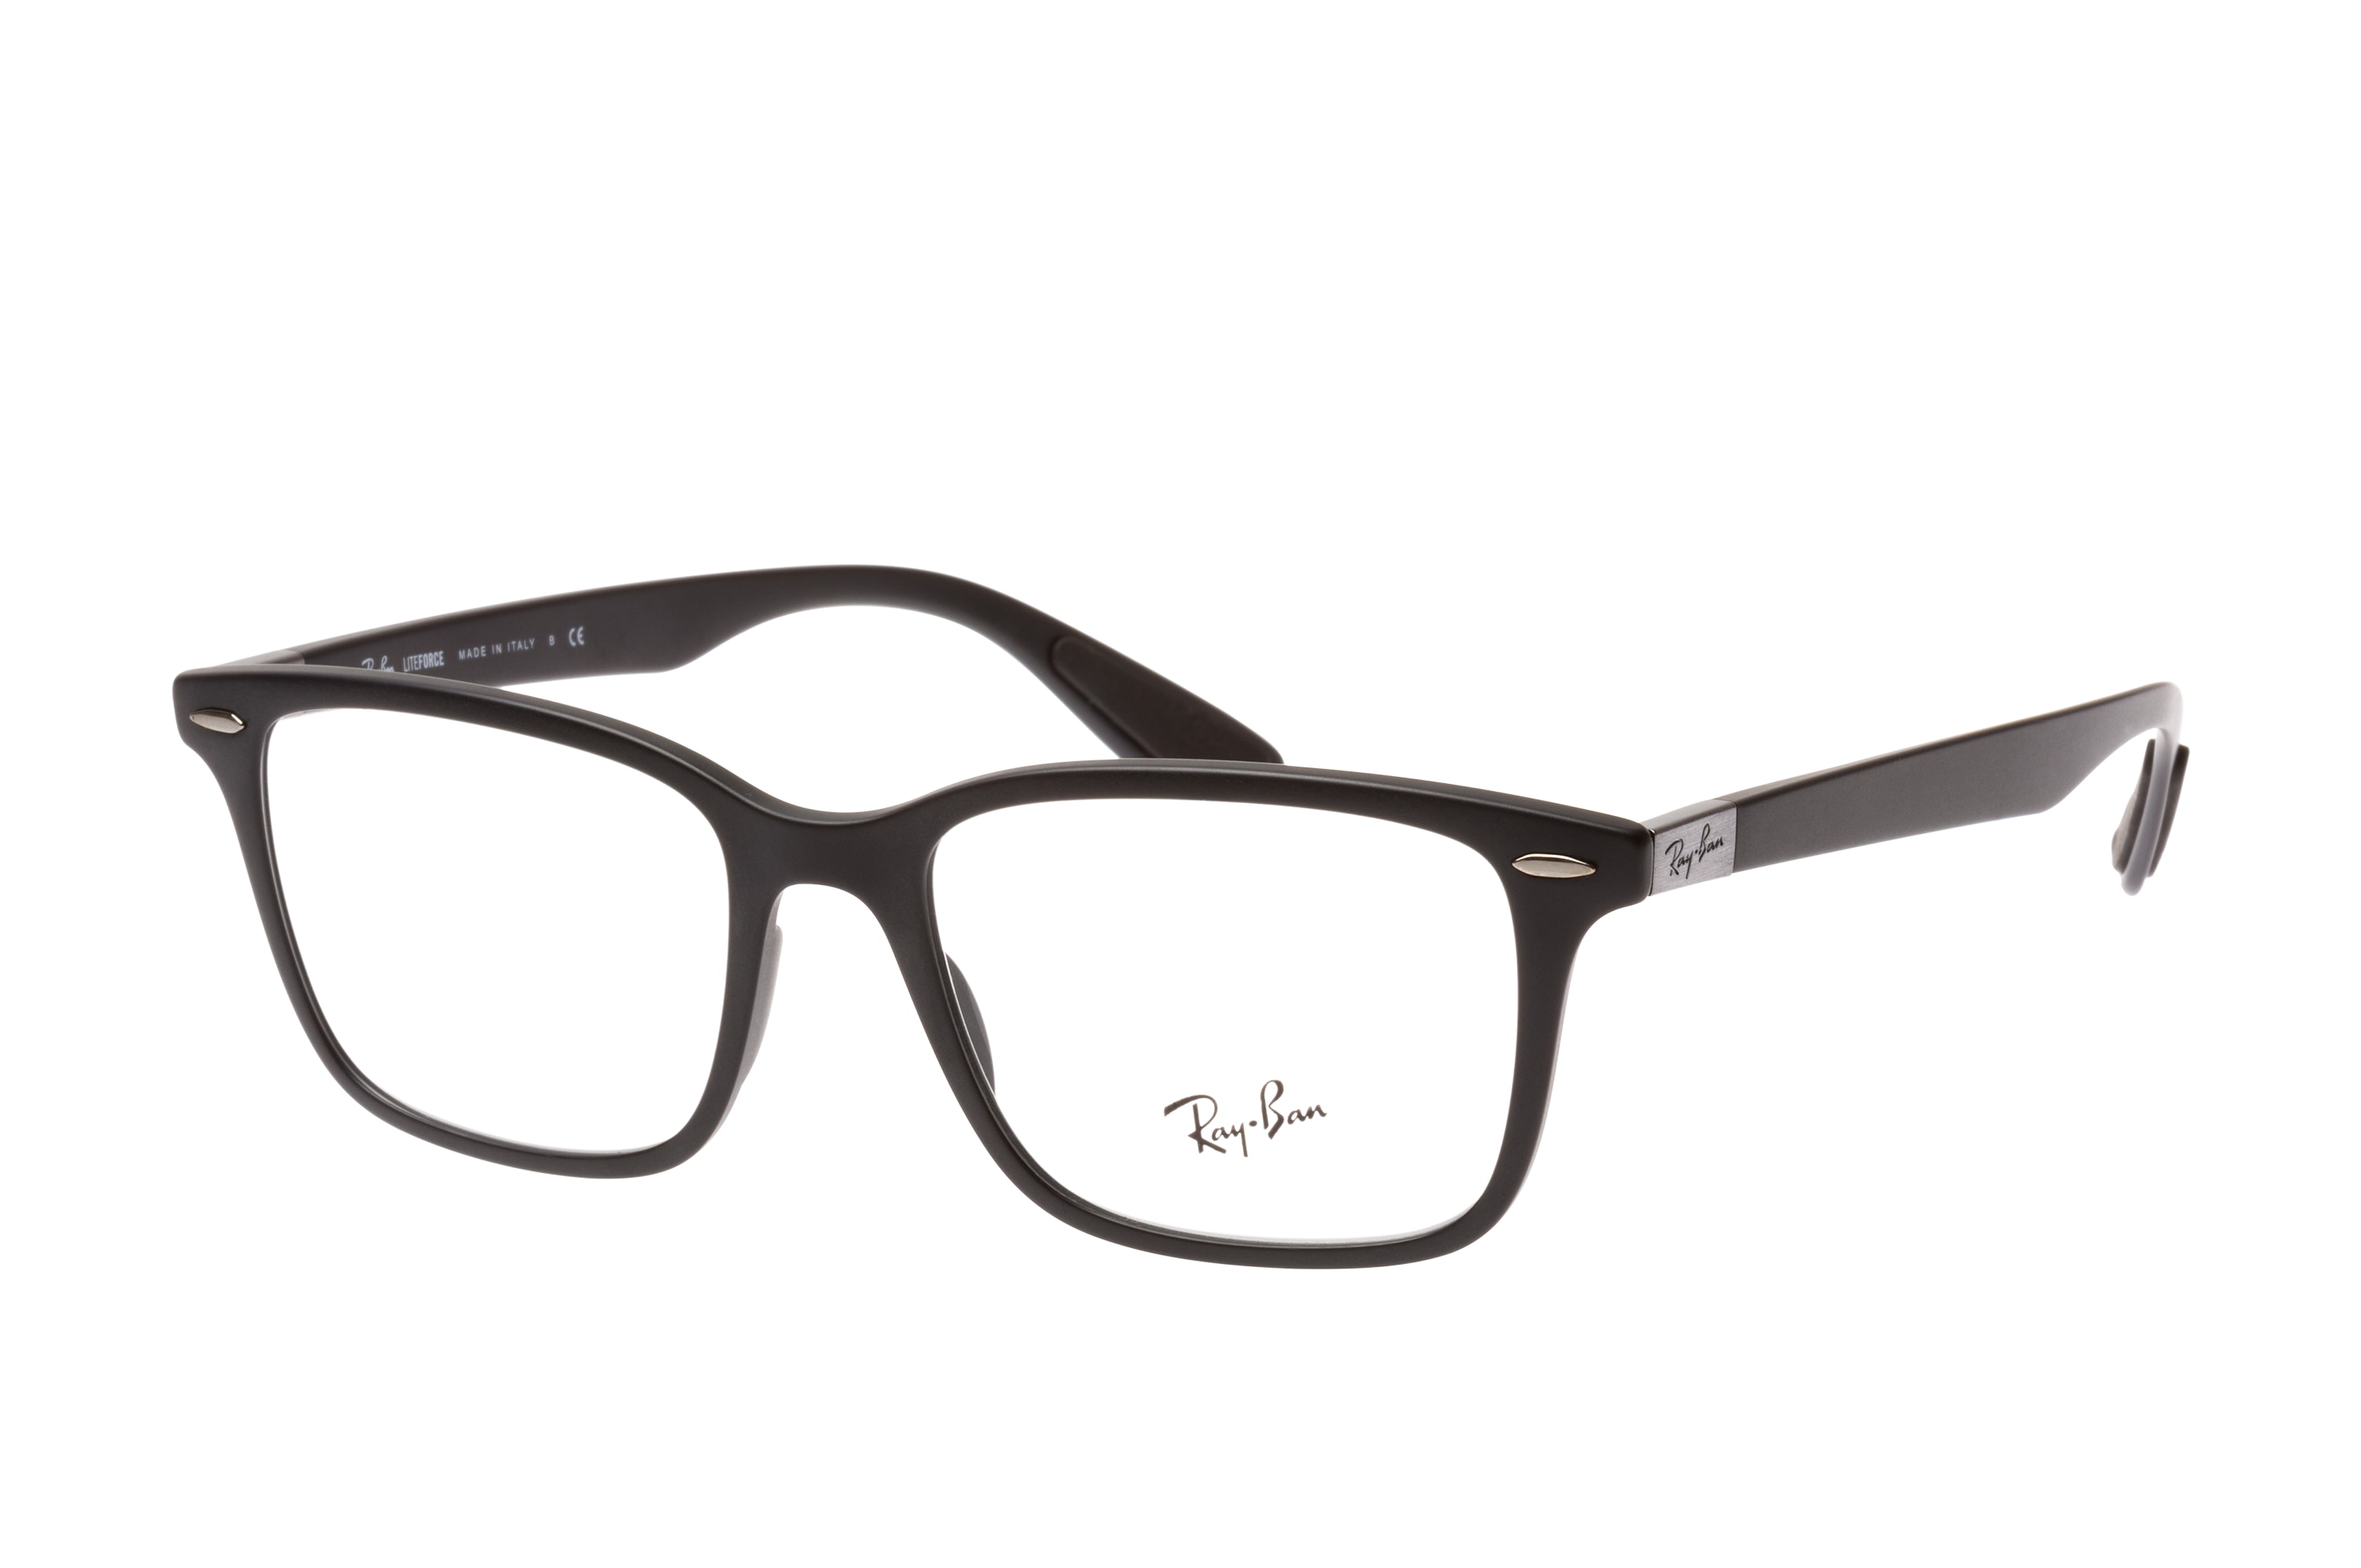 Ray-Ban Liteforce RX 7144 5204